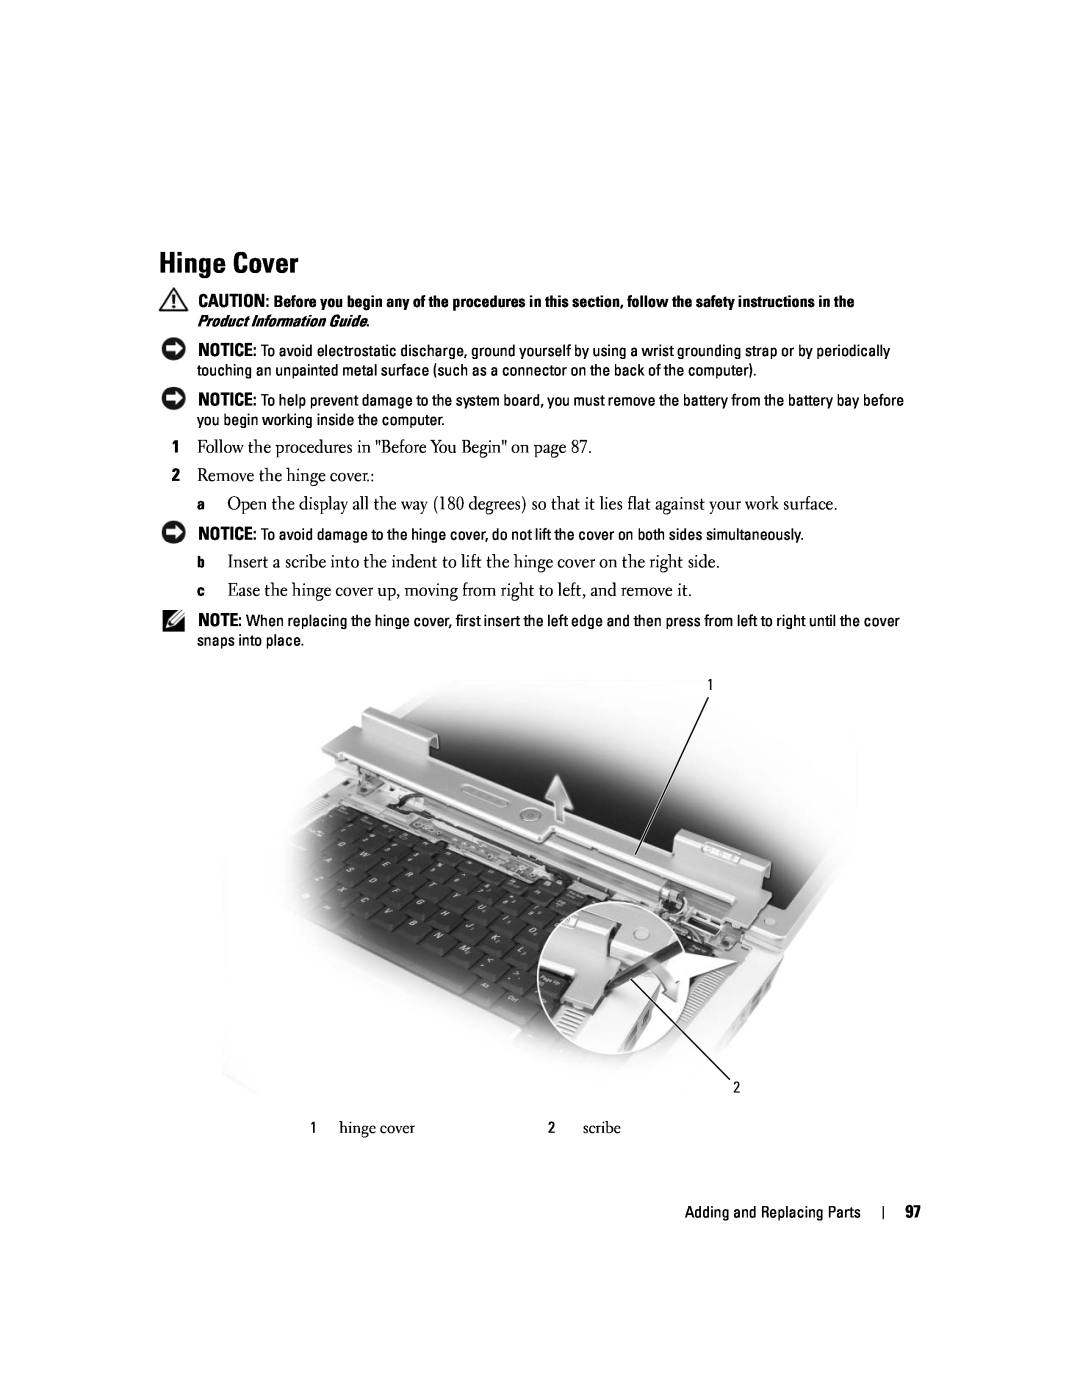 Dell 1501 owner manual Hinge Cover, hinge cover, scribe 